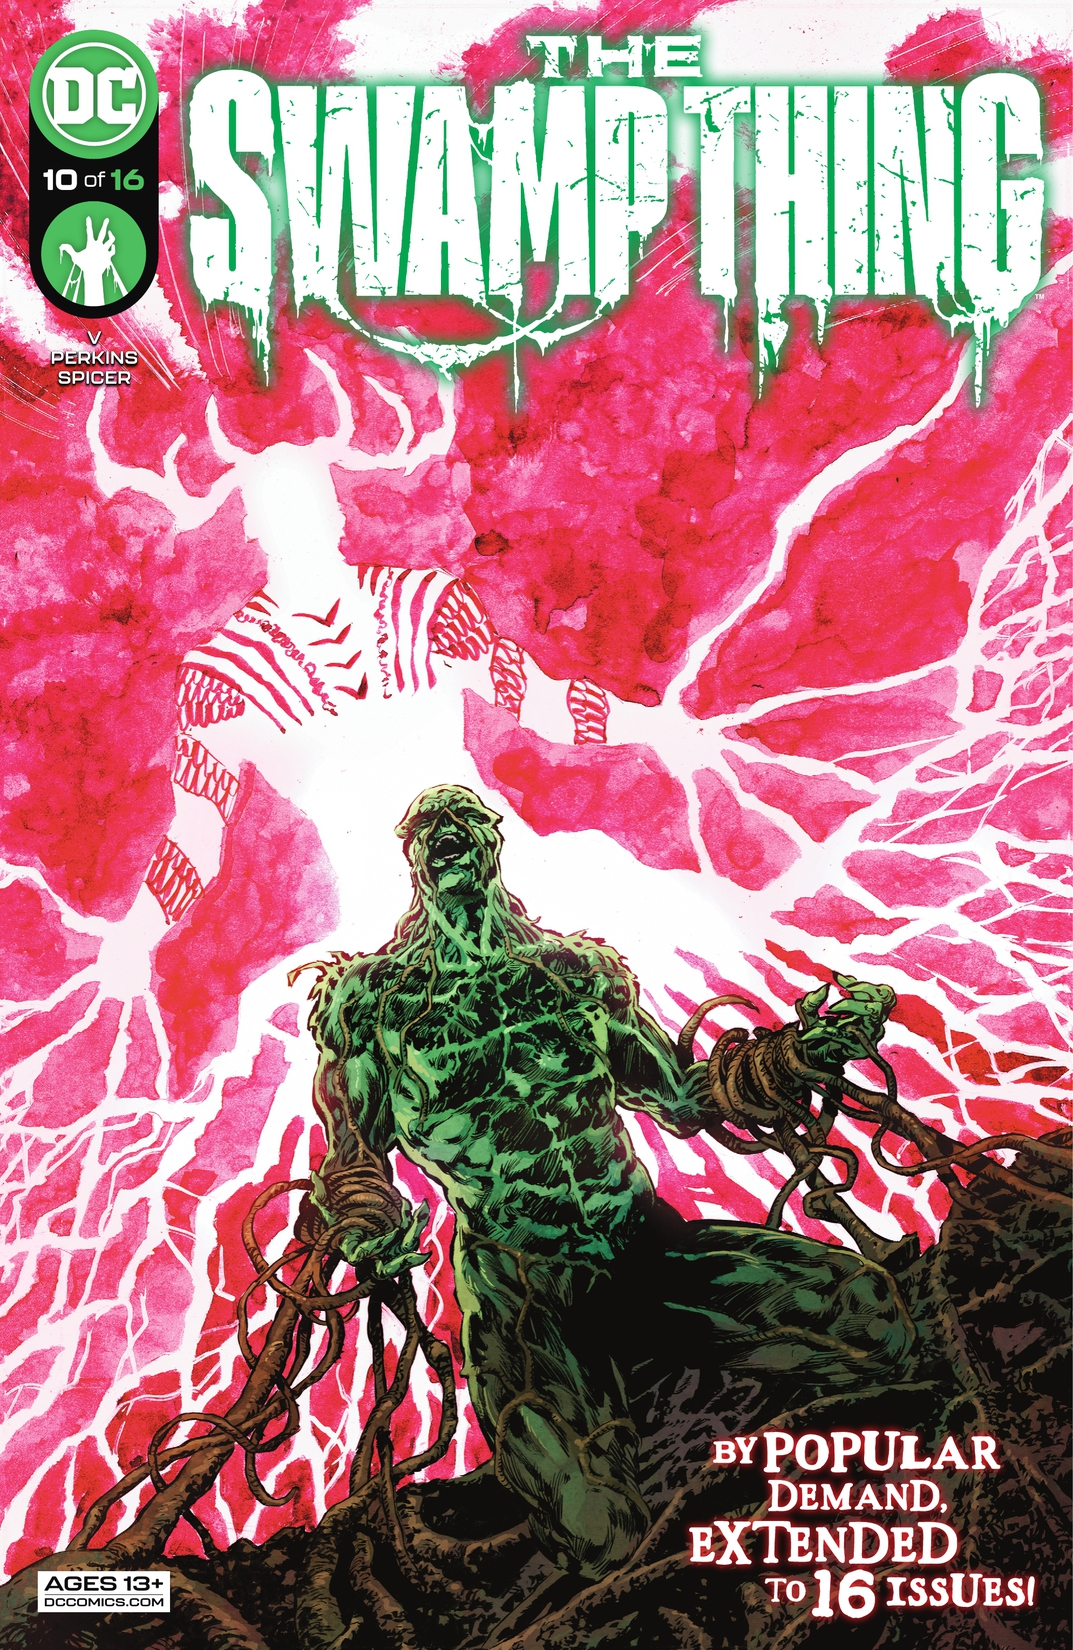 The Swamp Thing #10 preview images